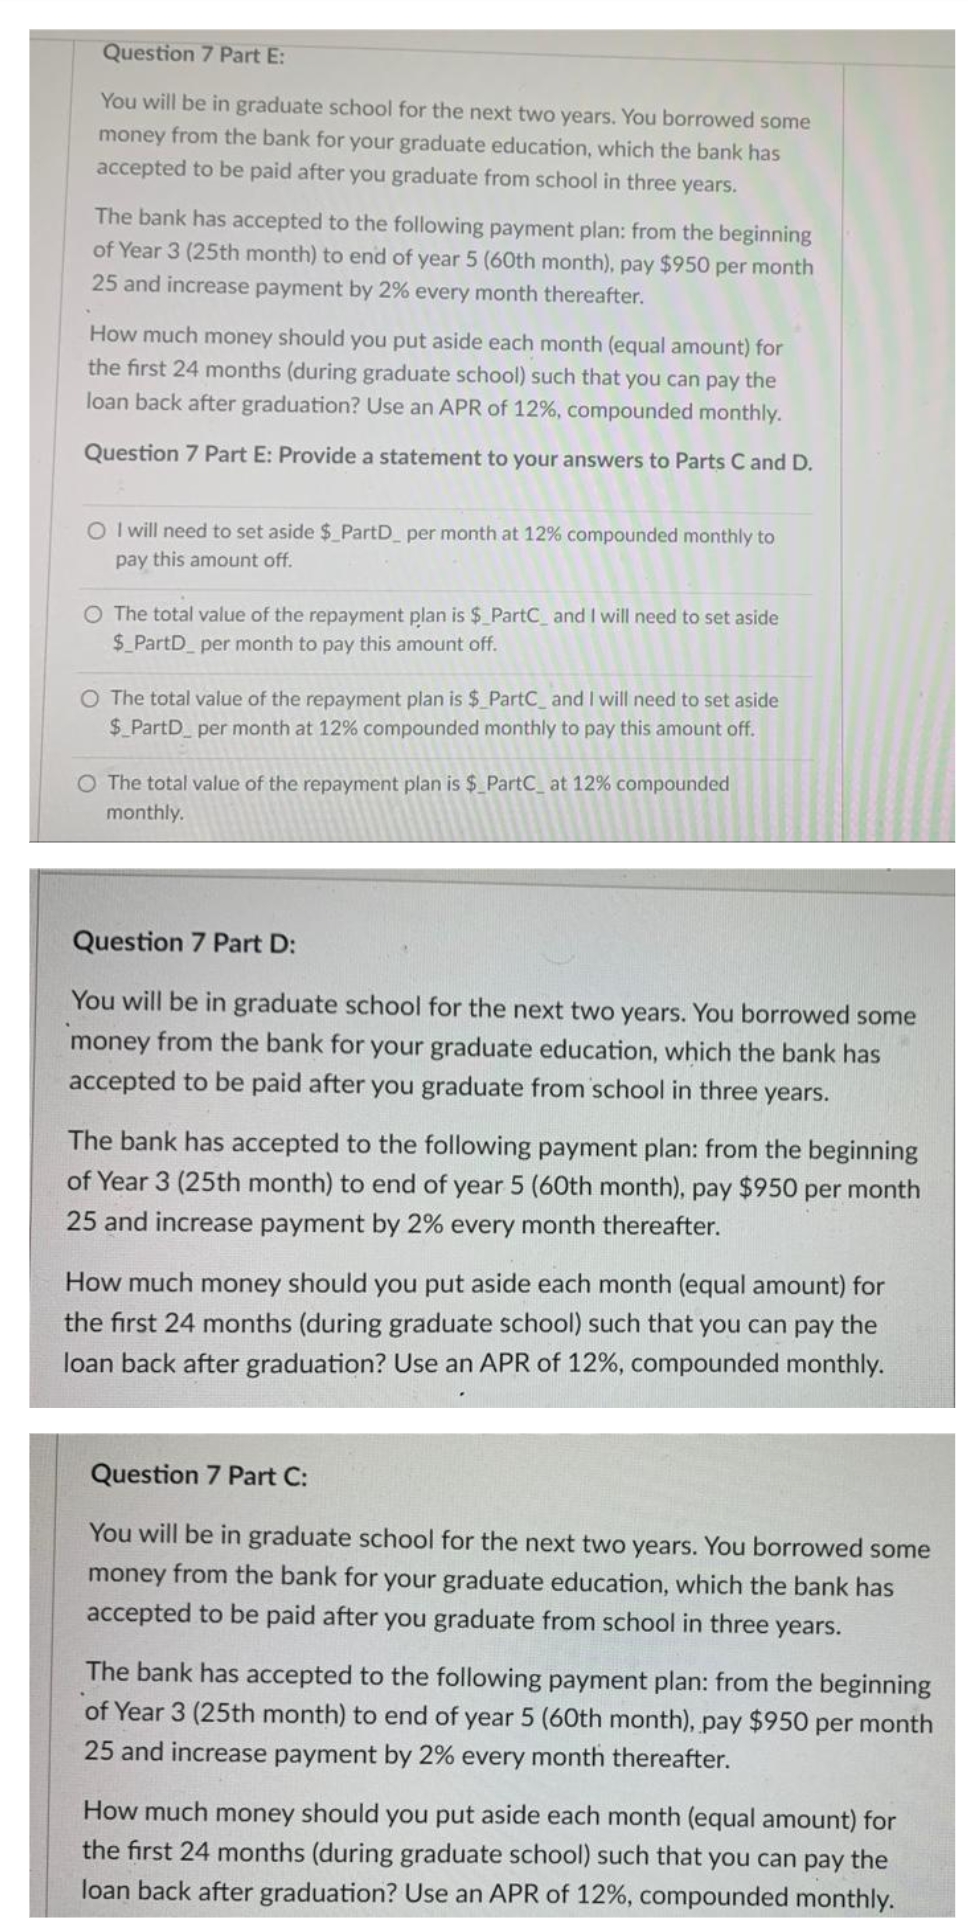 Question 7 Part E:
You will be in graduate school for the next two years. You borrowed some
money from the bank for your graduate education, which the bank has
accepted to be paid after you graduate from school in three years.
The bank has accepted to the following payment plan: from the beginning
of Year 3 (25th month) to end of year 5 (60th month), pay $950 per month
25 and increase payment by 2% every month thereafter.
How much money should you put aside each month (equal amount) for
the first 24 months (during graduate school) such that you can pay the
loan back after graduation? Use an APR of 12%, compounded monthly.
Question 7 Part E: Provide a statement to your answers to Parts C and D.
O I will need to set aside $ PartD per month at 12% compounded monthly to
pay this amount off.
O The total value of the repayment plan is $ PartC_ and I will need to set aside
$_PartD per month to pay this amount off.
O The total value of the repayment plan is $ PartC_and I will need to set aside
$_PartD per month at 12% compounded monthly to pay this amount off.
O The total value of the repayment plan is $_PartC_ at 12% compounded
monthly.
Question 7 Part D:
You will be in graduate school for the next two years. You borrowed some
money from the bank for your graduate education, which the bank has
accepted to be paid after you graduate from school in three years.
The bank has accepted to the following payment plan: from the beginning
of Year 3 (25th month) to end of year 5 (60th month), pay $950 per month
25 and increase payment by 2% every month thereafter.
How much money should you put aside each month (equal amor
the first 24 months (during graduate school) such that you can pay the
for
loan back after graduation? Use an APR of 12%, compounded monthly.
Question 7 Part C:
You will be in graduate school for the next two years. You borrowed some
money from the bank for your graduate education, which the bank has
accepted to be paid after you graduate from school in three years.
The bank has accepted to the following payment plan: from the beginning
of Year 3 (25th month) to end of year 5 (60th month), pay $950 per month
25 and increase payment by 2% every month thereafter.
How much money should you put aside each month (equal amount) for
the first 24 months (during graduate school) such that you can pay the
loan back after graduation? Use an APR of 12%, compounded monthly.
